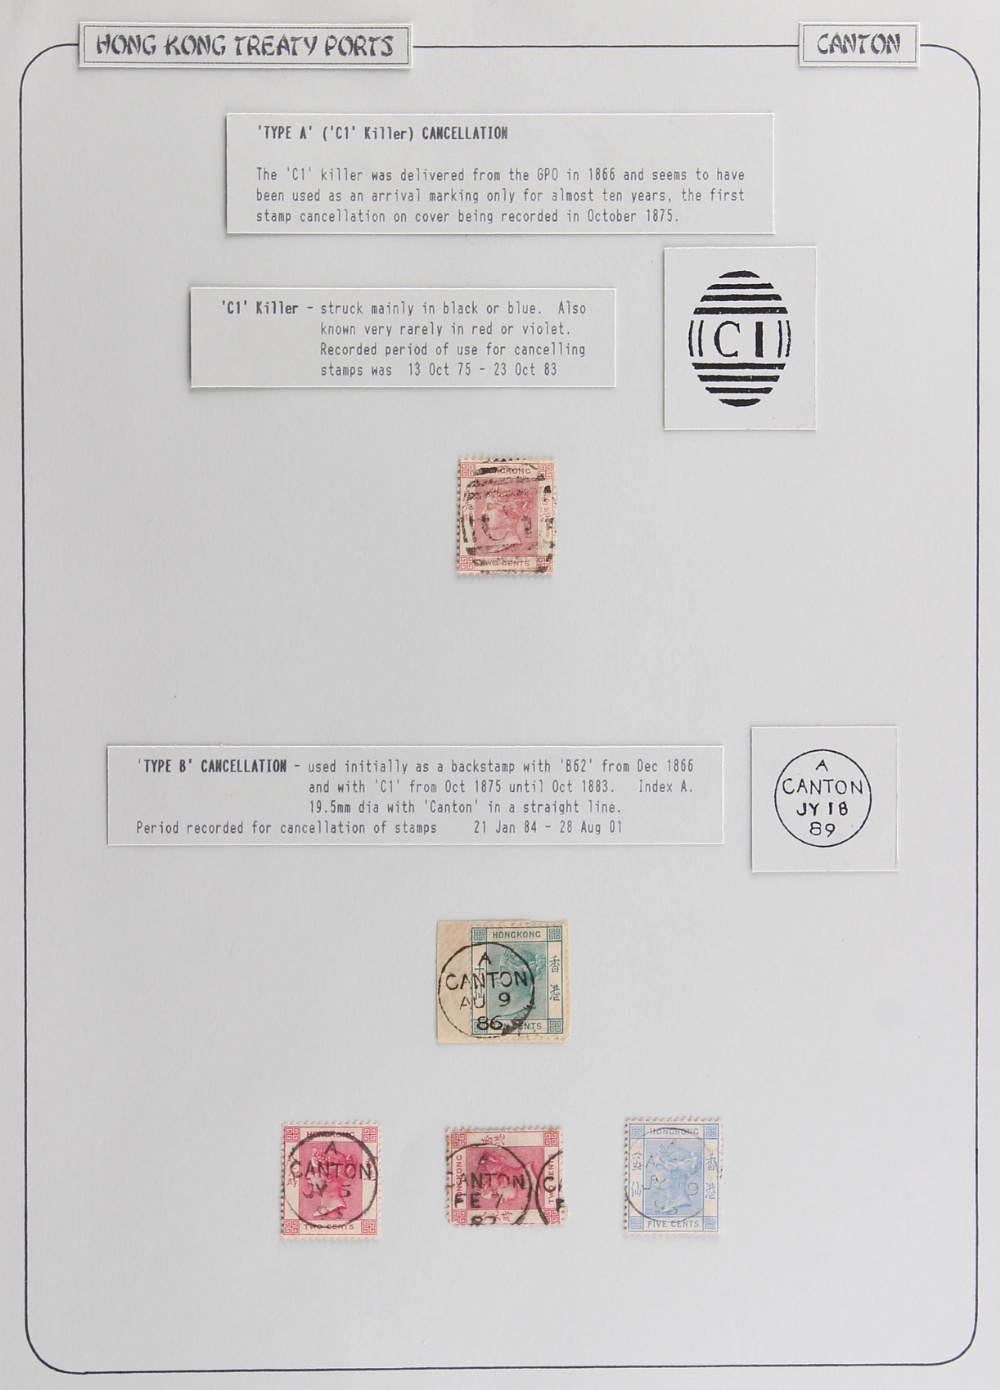 The Basil Lewis (1927-2019) collection of stamps - Hong Kong: Treaty Ports - Canton including a good